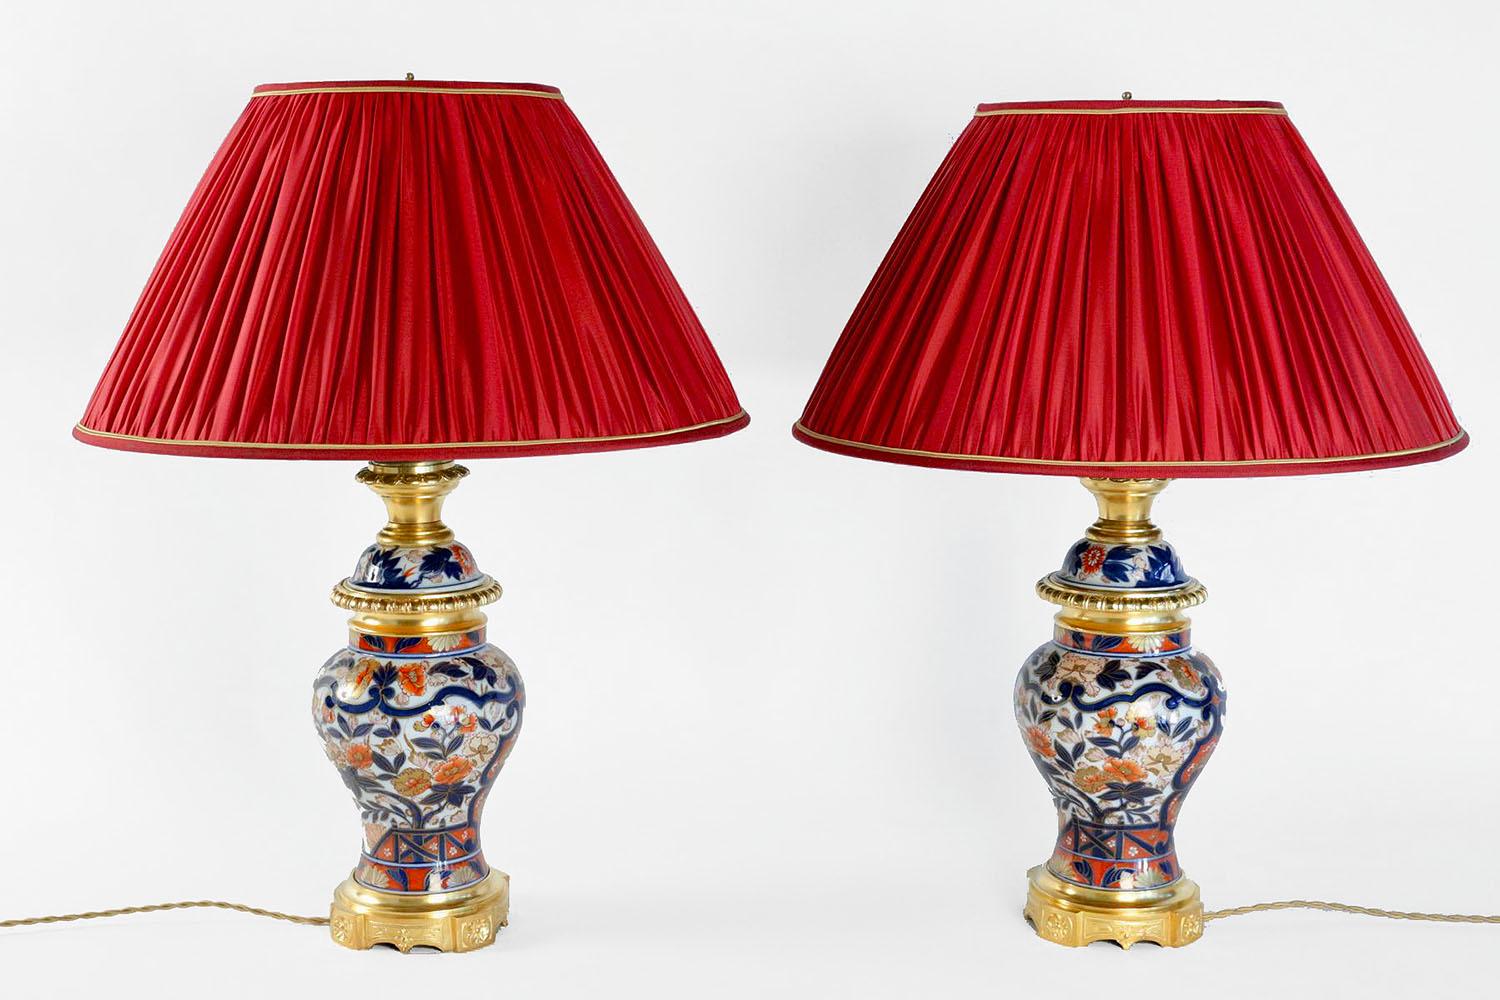 Pair of vase shape lamps in Bayeux porcelain with an Imari decoration on a chiselled and gilt bronze mount. Circular base adorned with guilloche background cartouches and with four projections adorned with rosettes.
Body of the lamp with a white